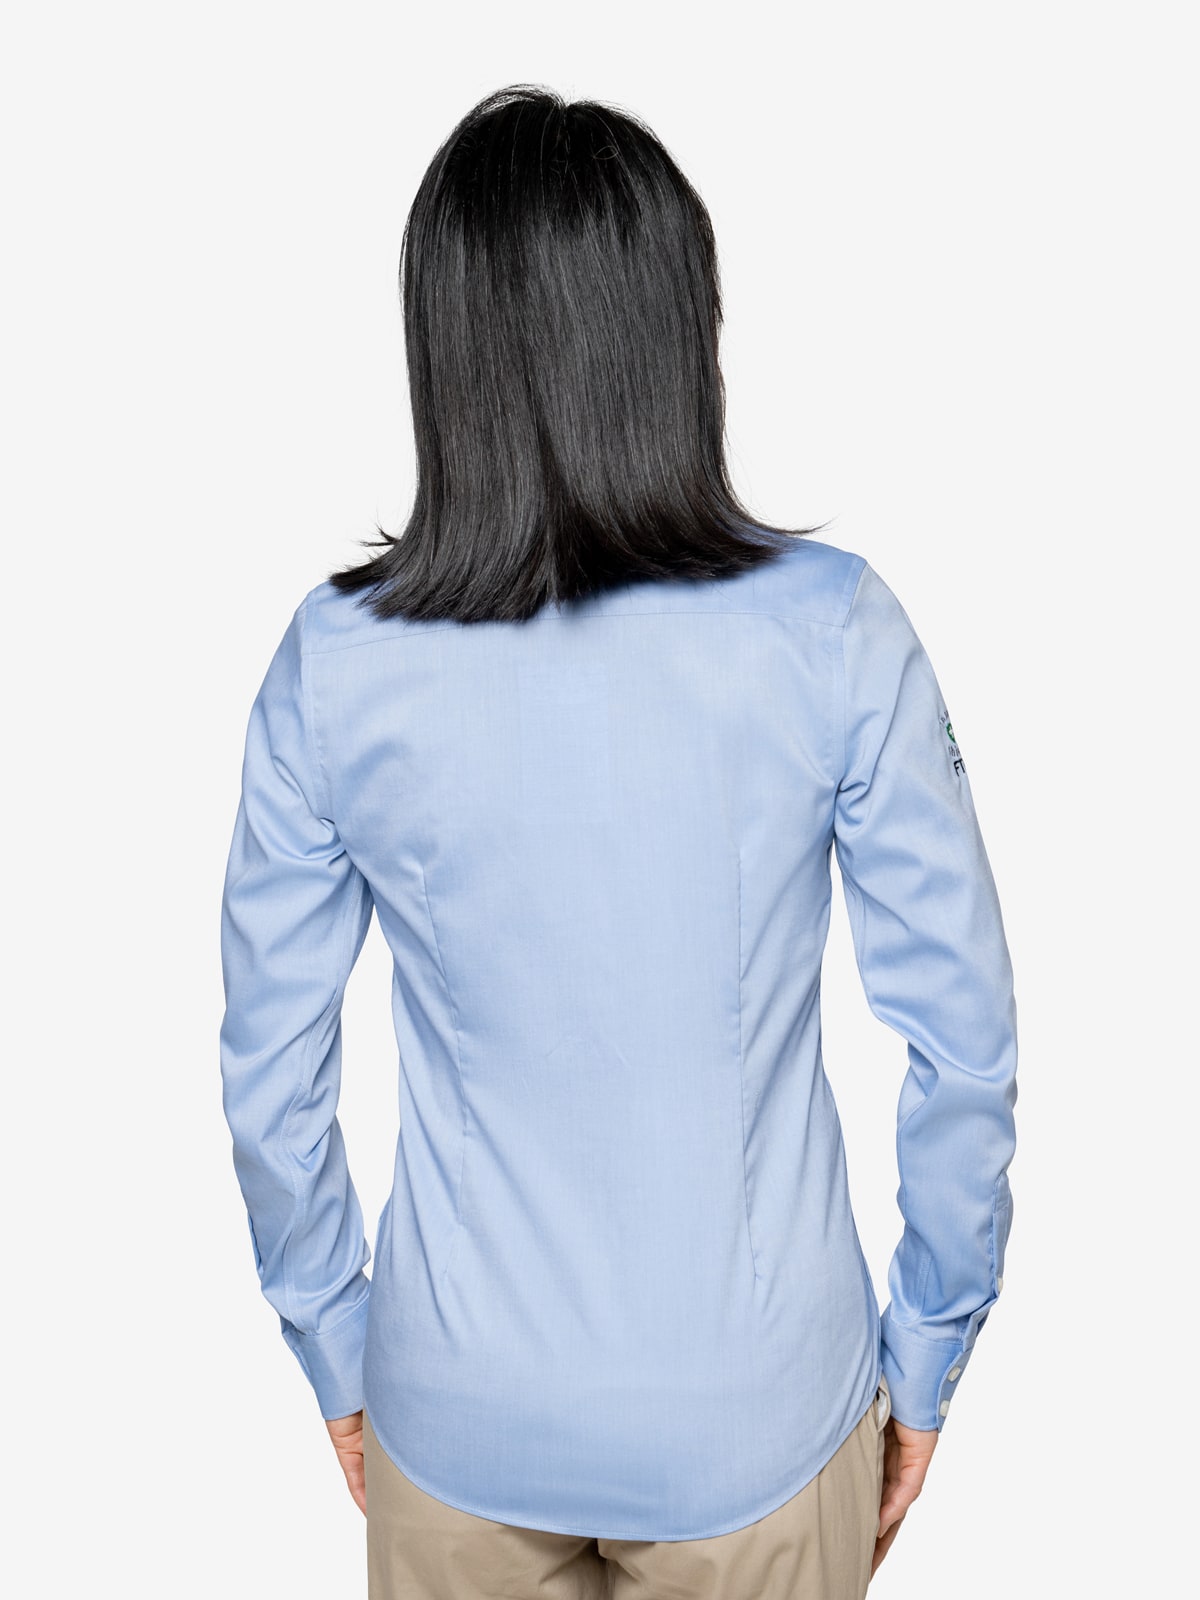 Insect Shield Women's Oxford Shirt